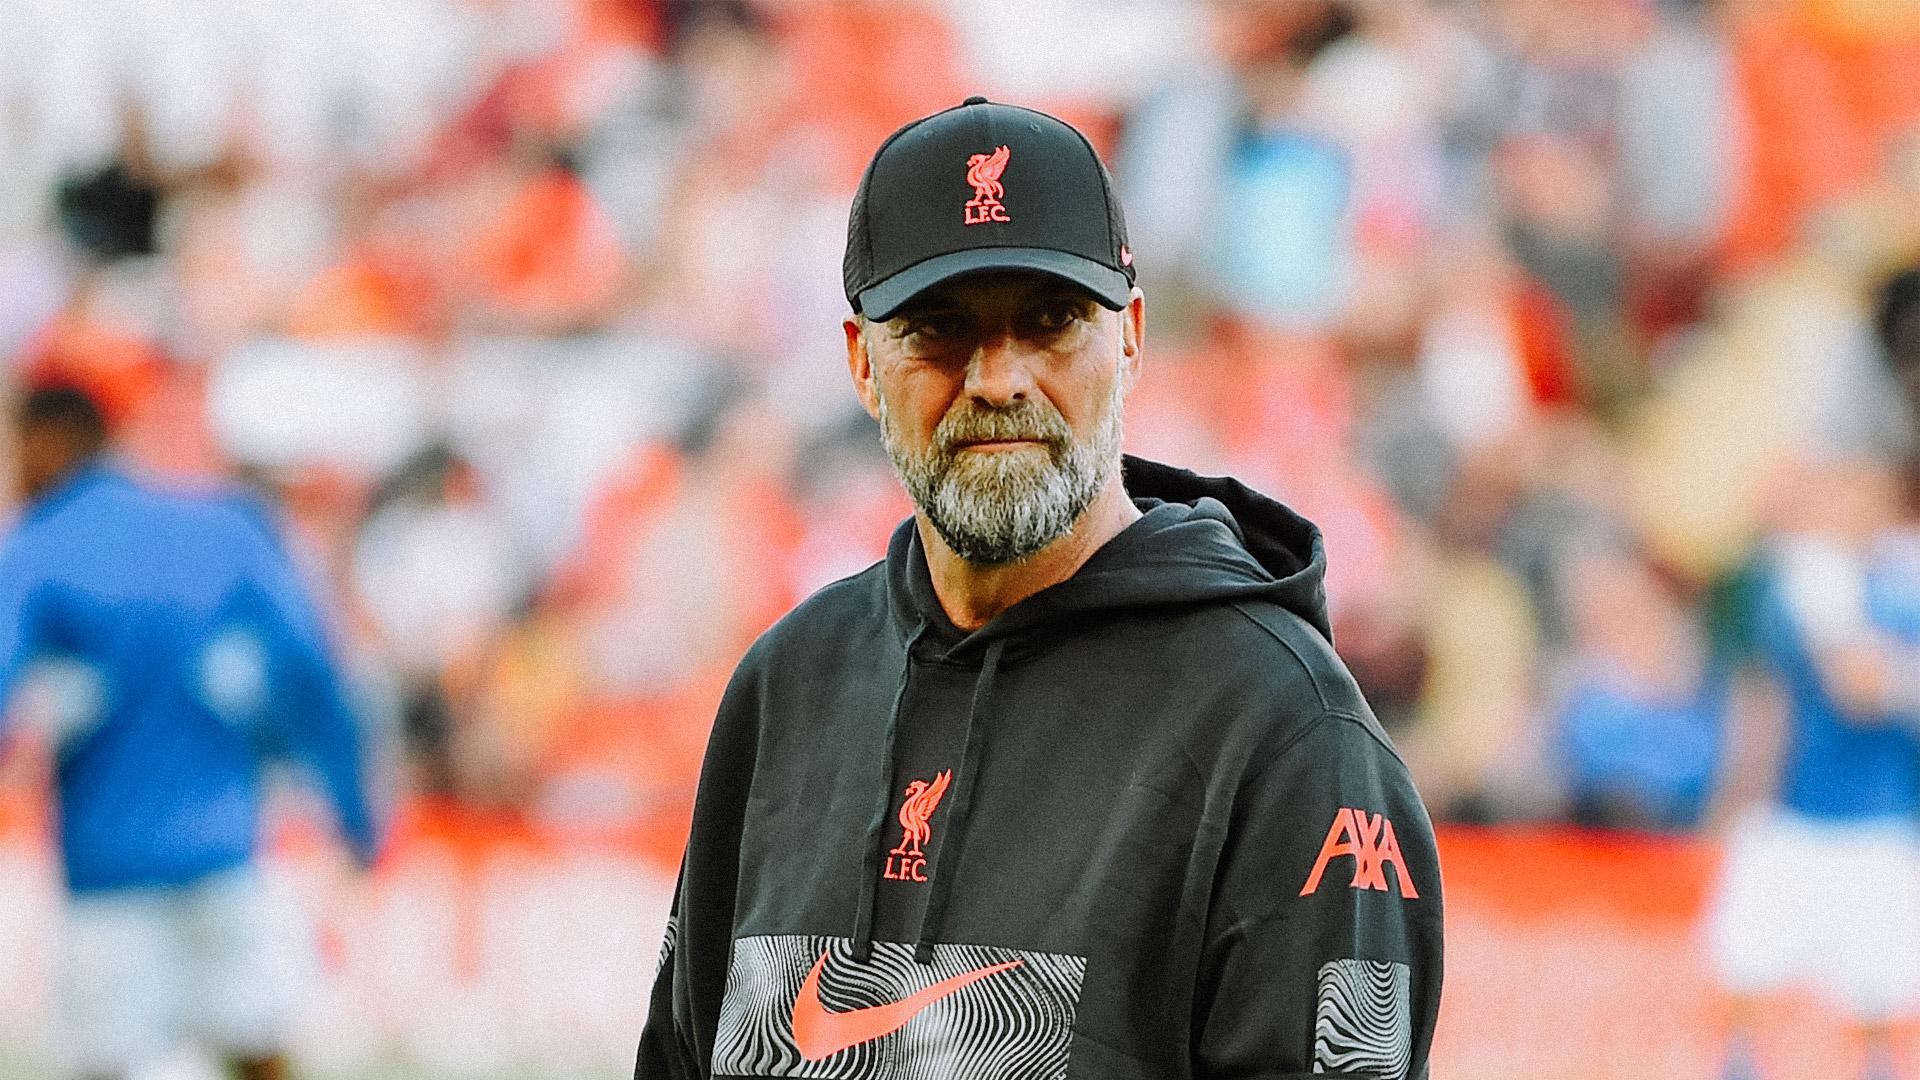 Liverpool FC — Jürgen Klopp on Strasbourg defeat, youngsters and starting  the season